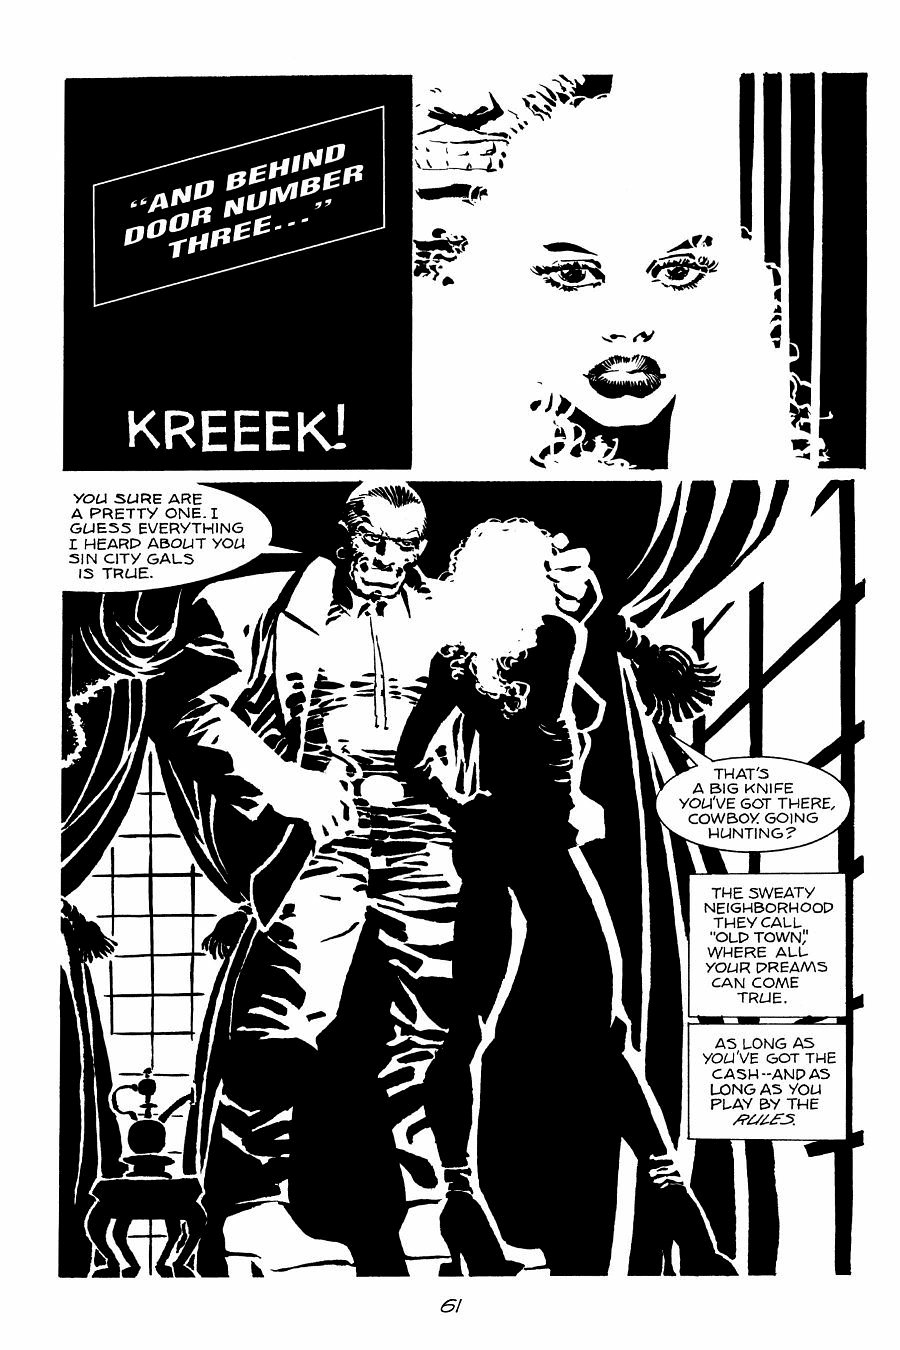 page 61 of sin city 6 booze broads and bullets